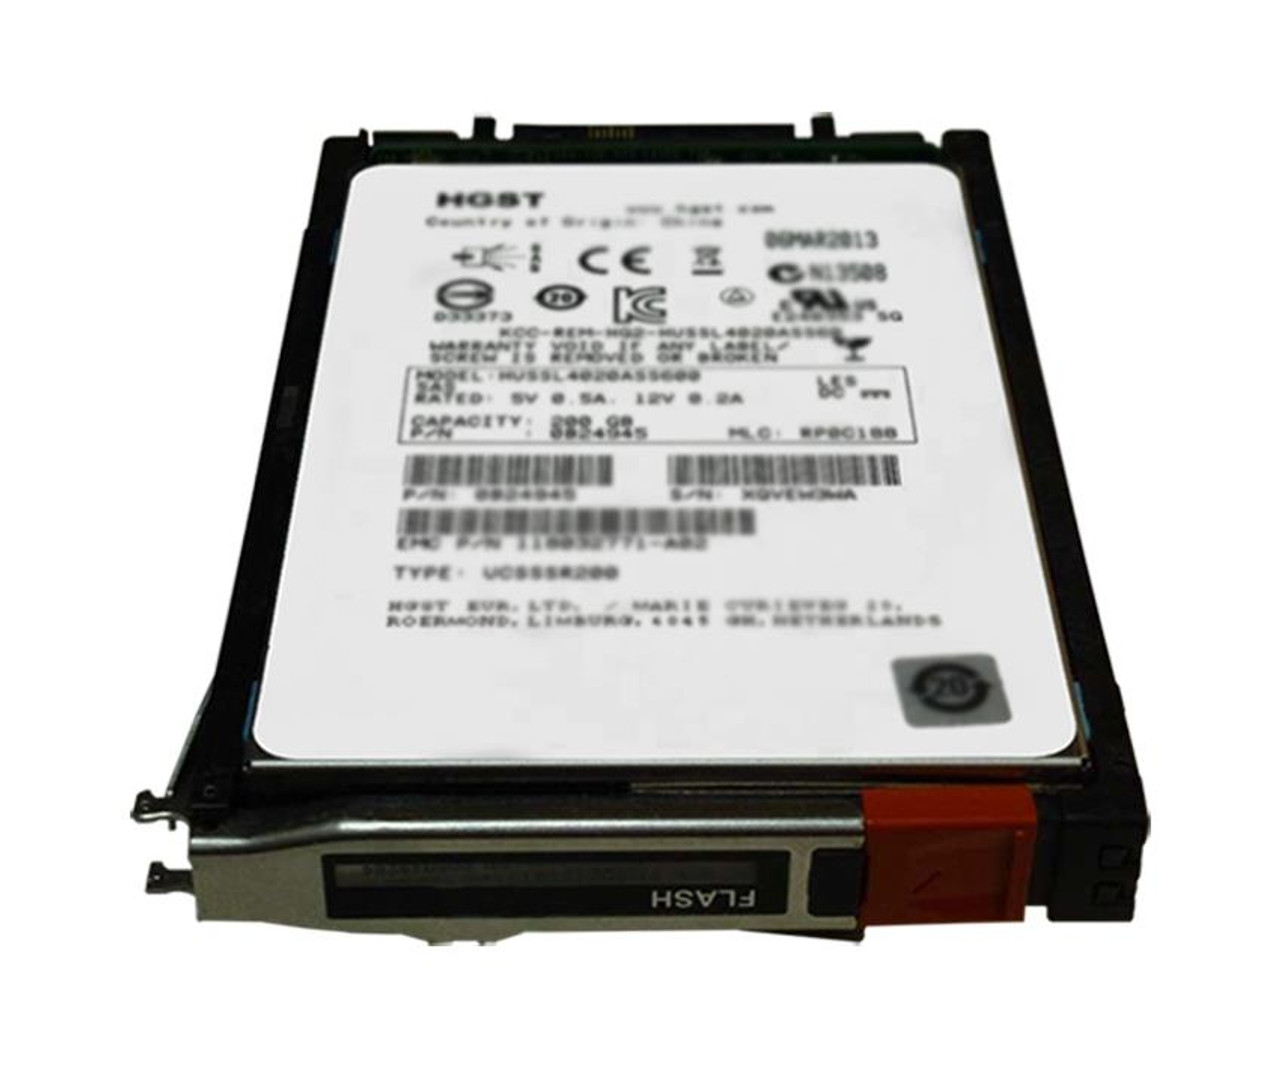 N5-2S6FX-200U EMC 200GB SAS 6Gbps 2.5-inch Internal Solid State Drive (SSD) Upgrade for VNXe1600 25 x 2.5 Enclosure